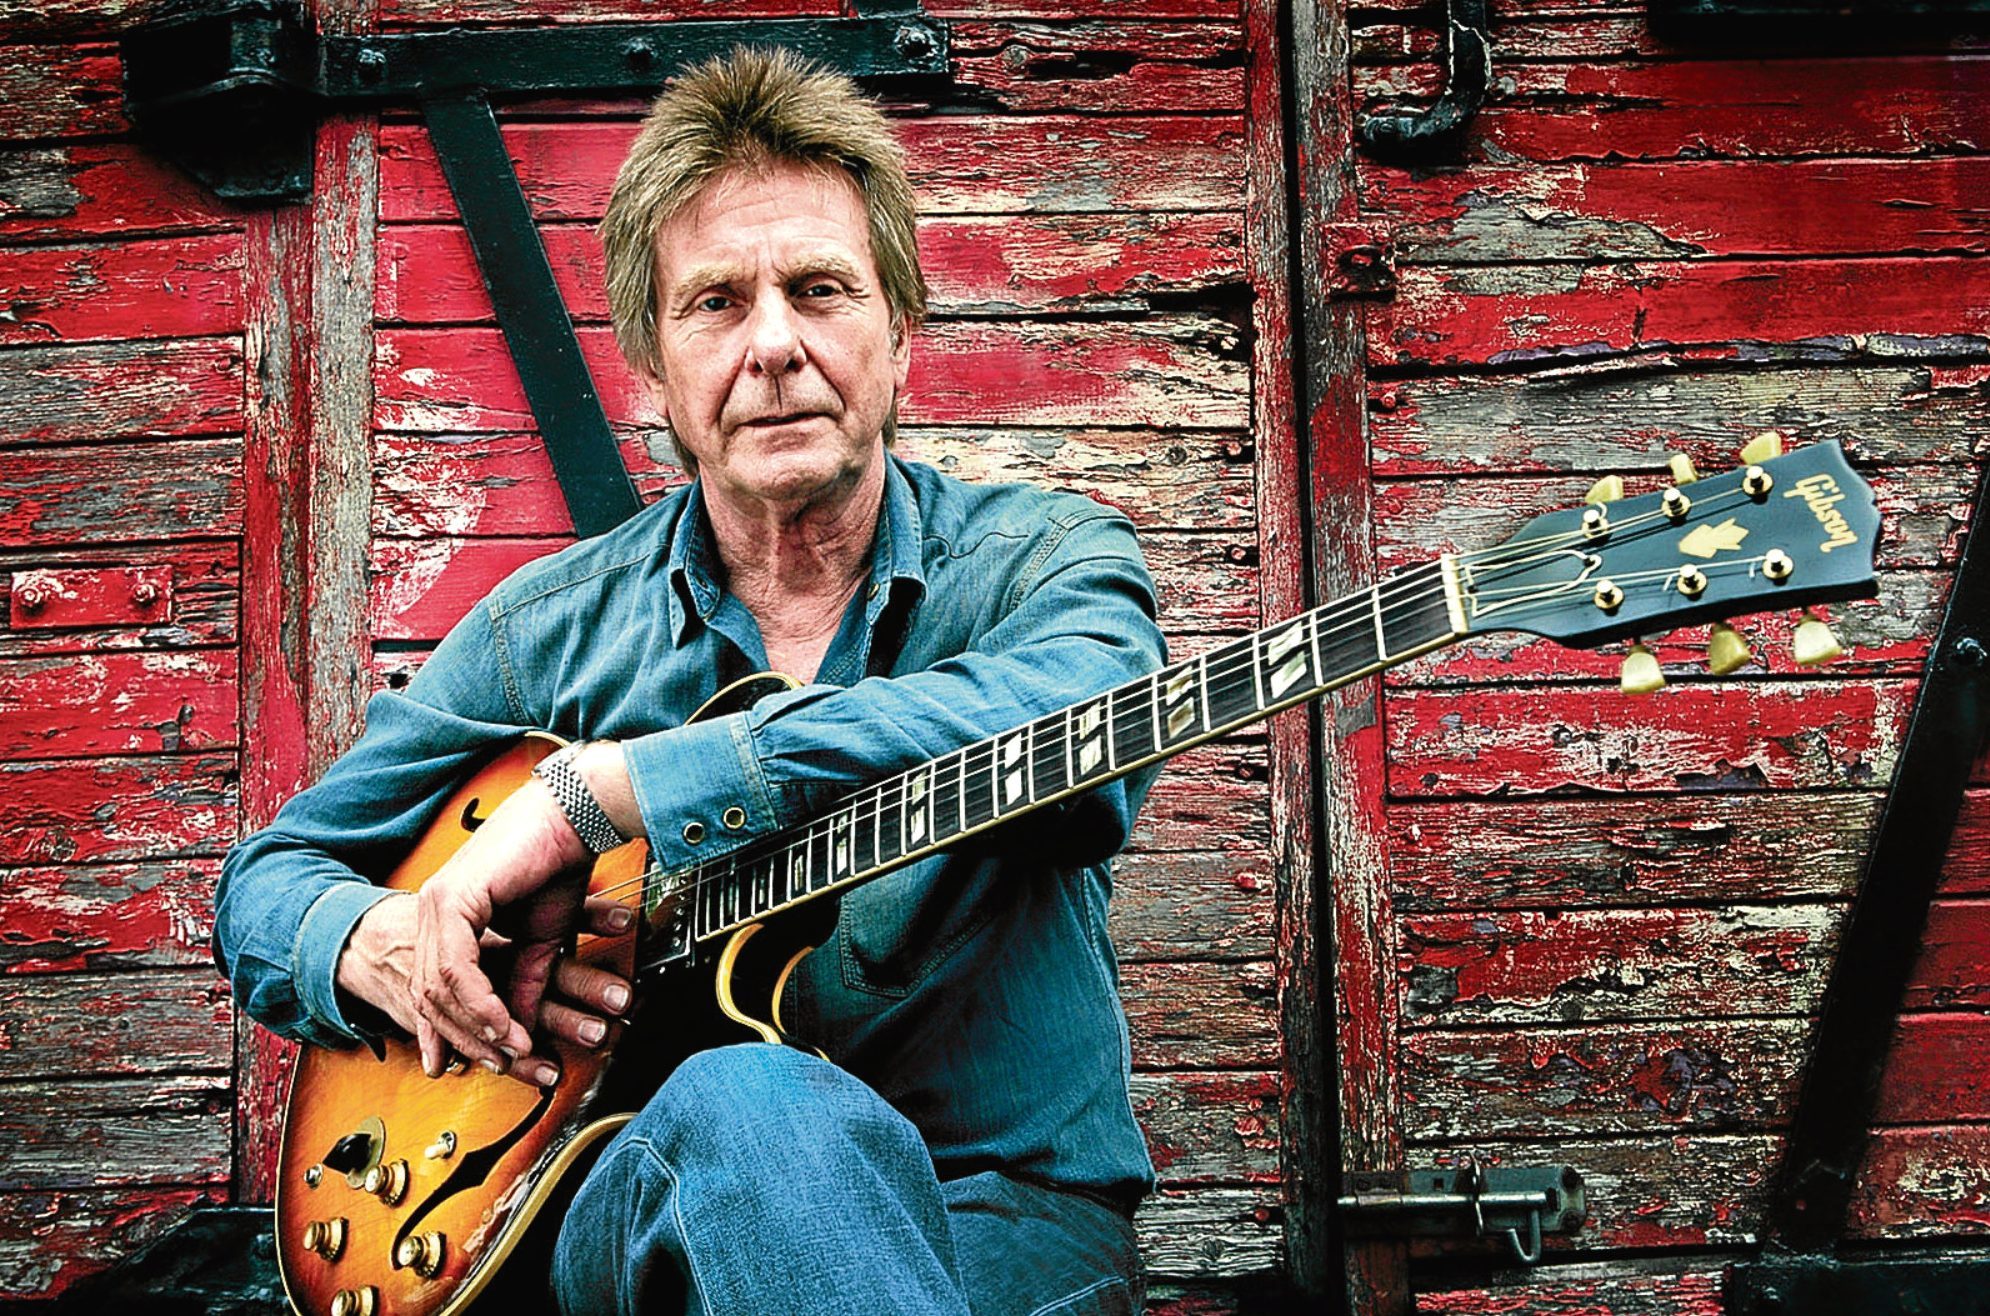 Rock and roll singer Joe Brown on new tour, a pilot and